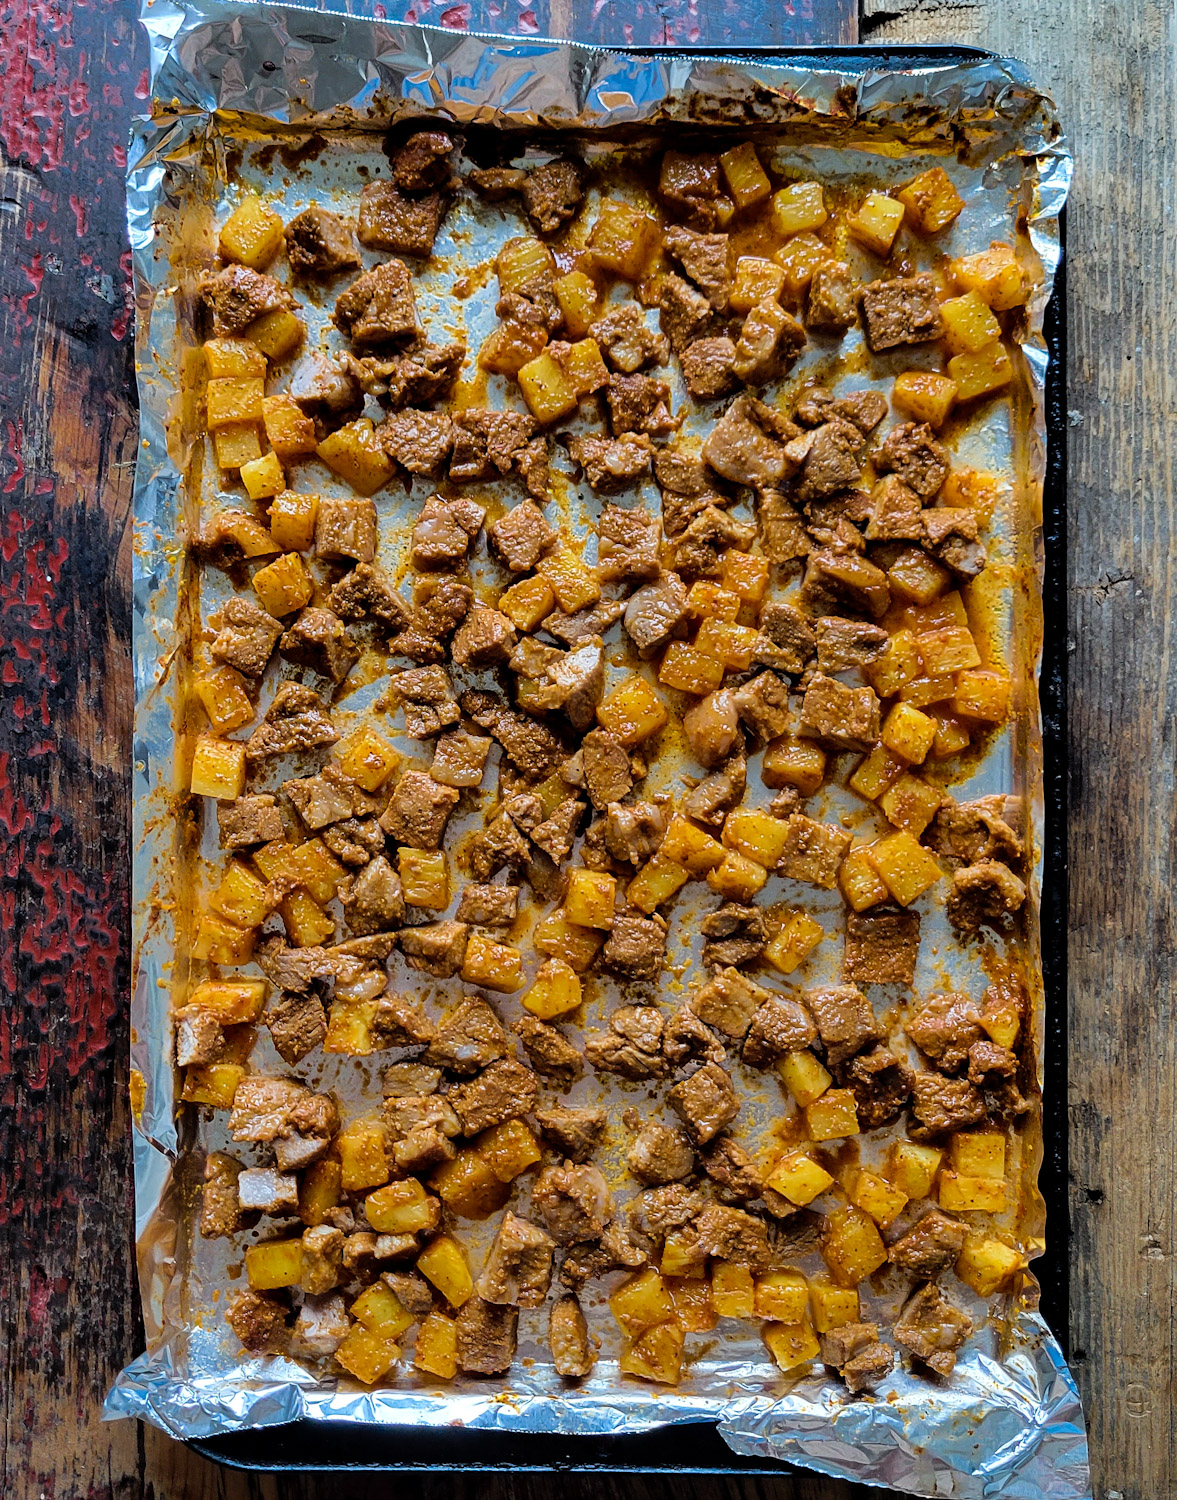 Al Pastor Marinated Pork and Pineapple cubed and spread out on a Baking sheet.